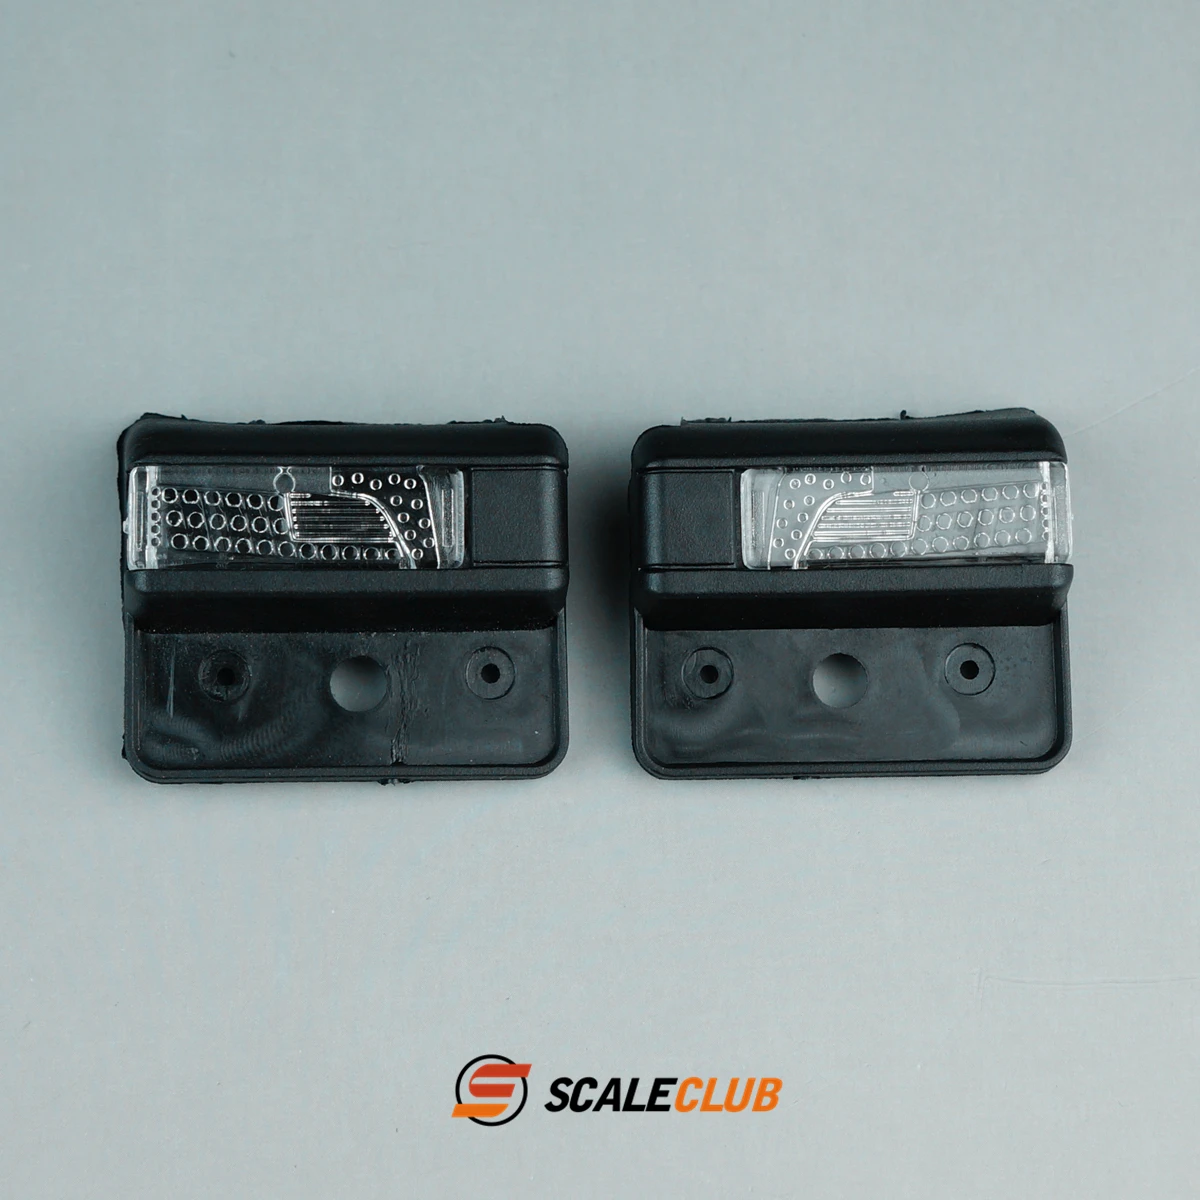 

Scaleclub Model 1/14 For Tamiya Scania R470 R620 New Taillights For Tamiya Lesu For Scania Man Actros Volvo Car Parts Rc Truck